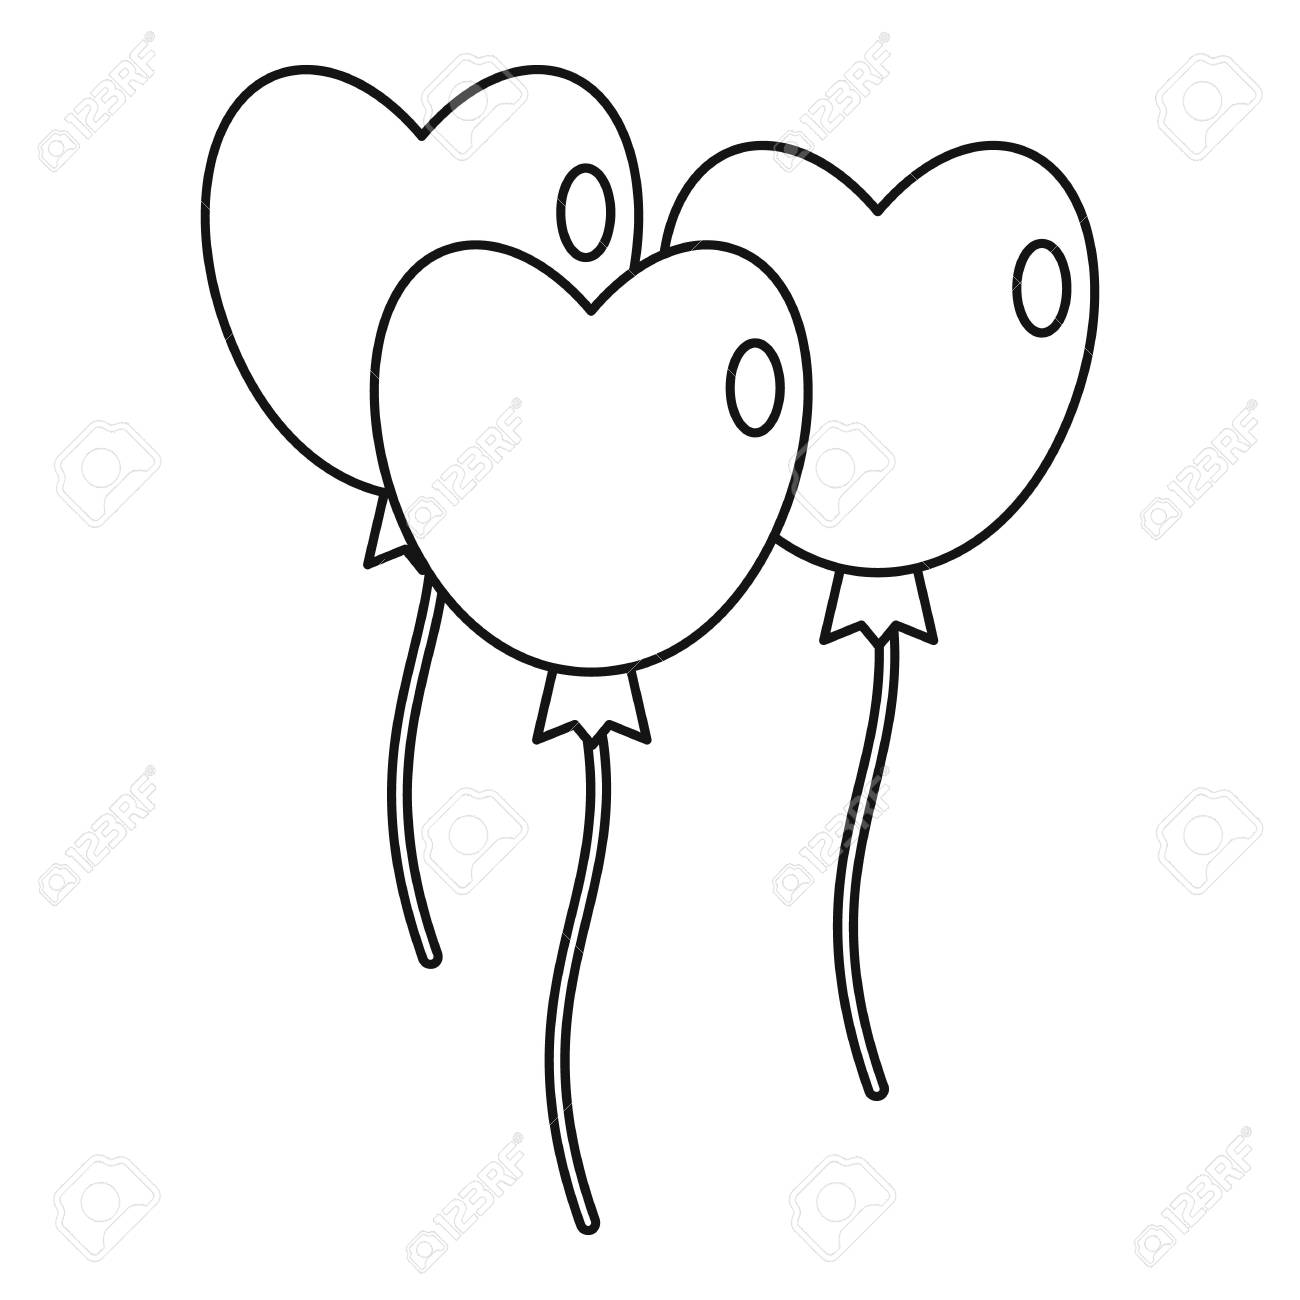 Heart Balloons Clipart Black And White.